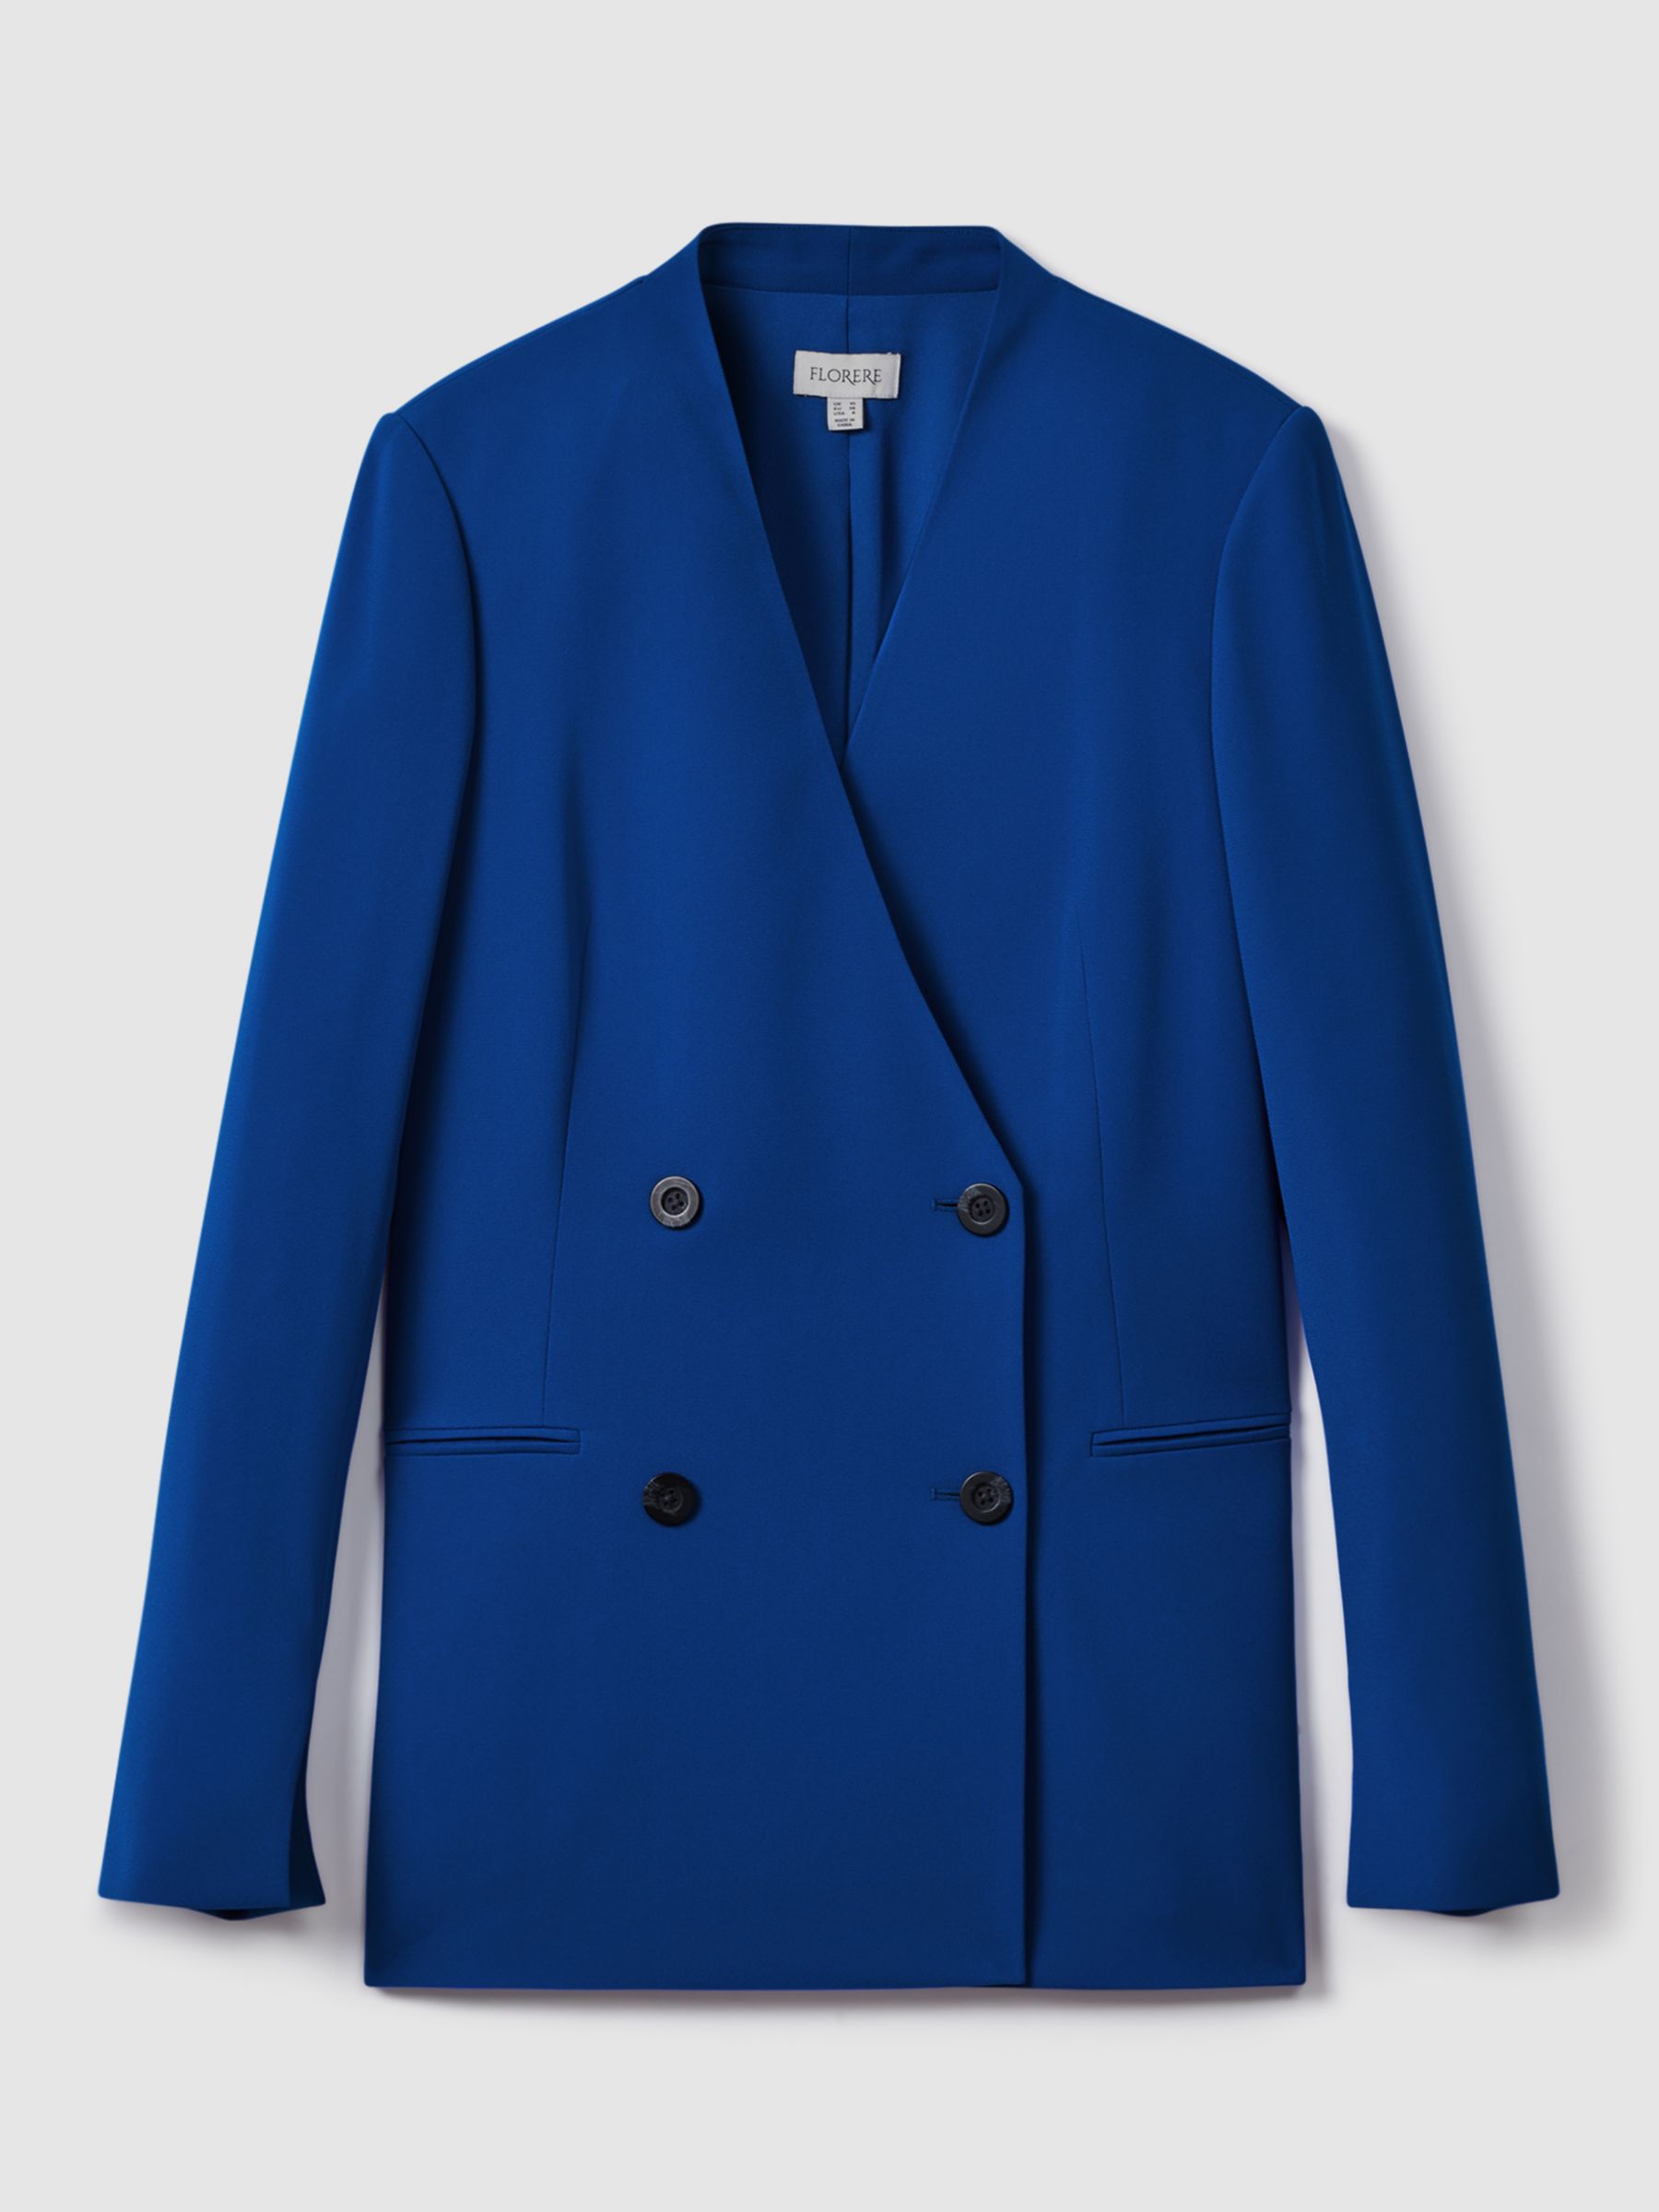 FLORERE Collarless Double Breasted Blazer, Bright Blue, 8